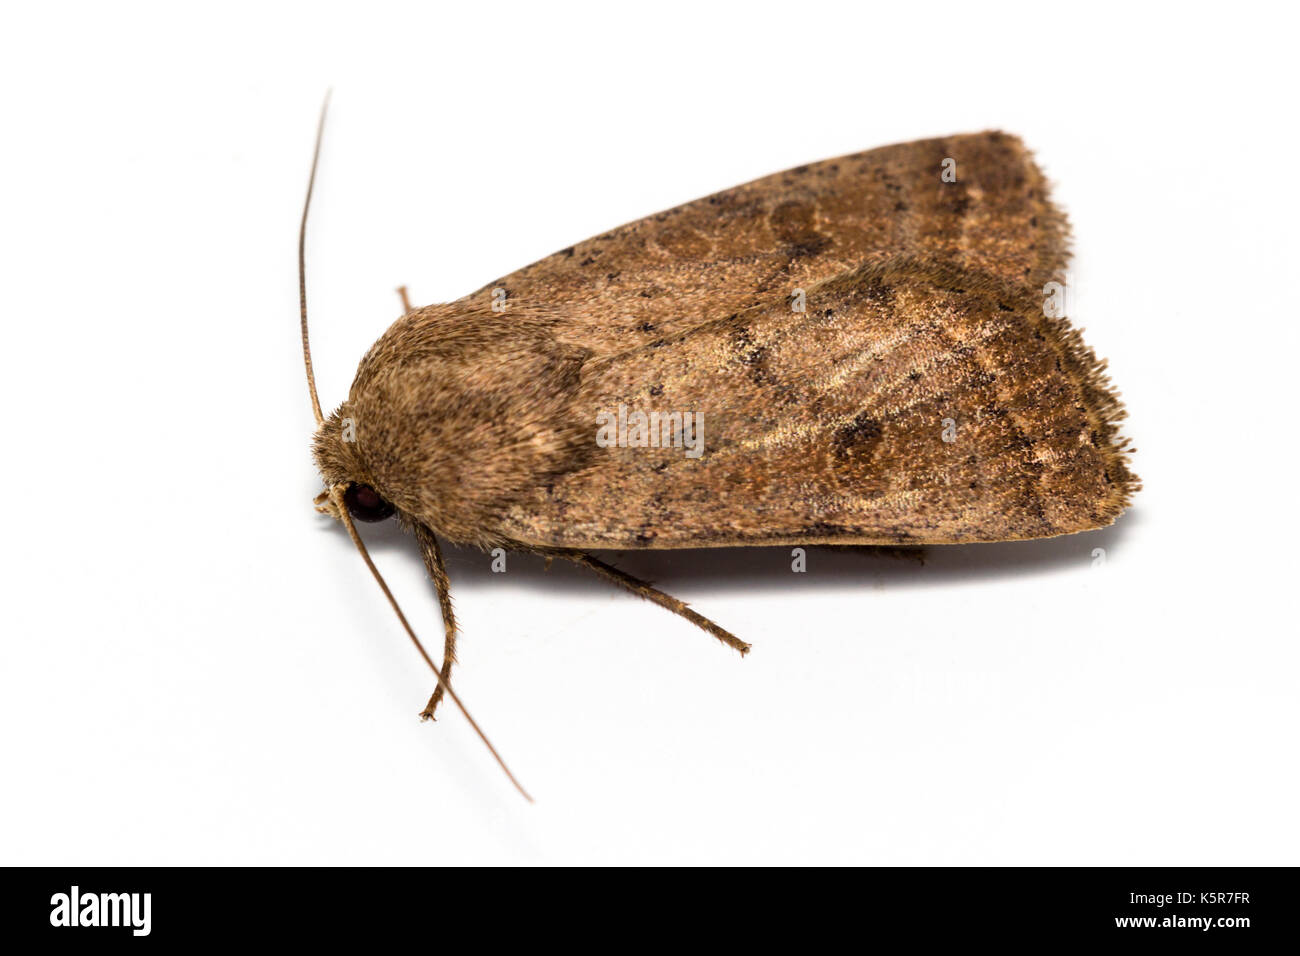 Adult Noctuid moth, Hoplodrina octogenaria, The Uncertain, at rest on a white background Stock Photo